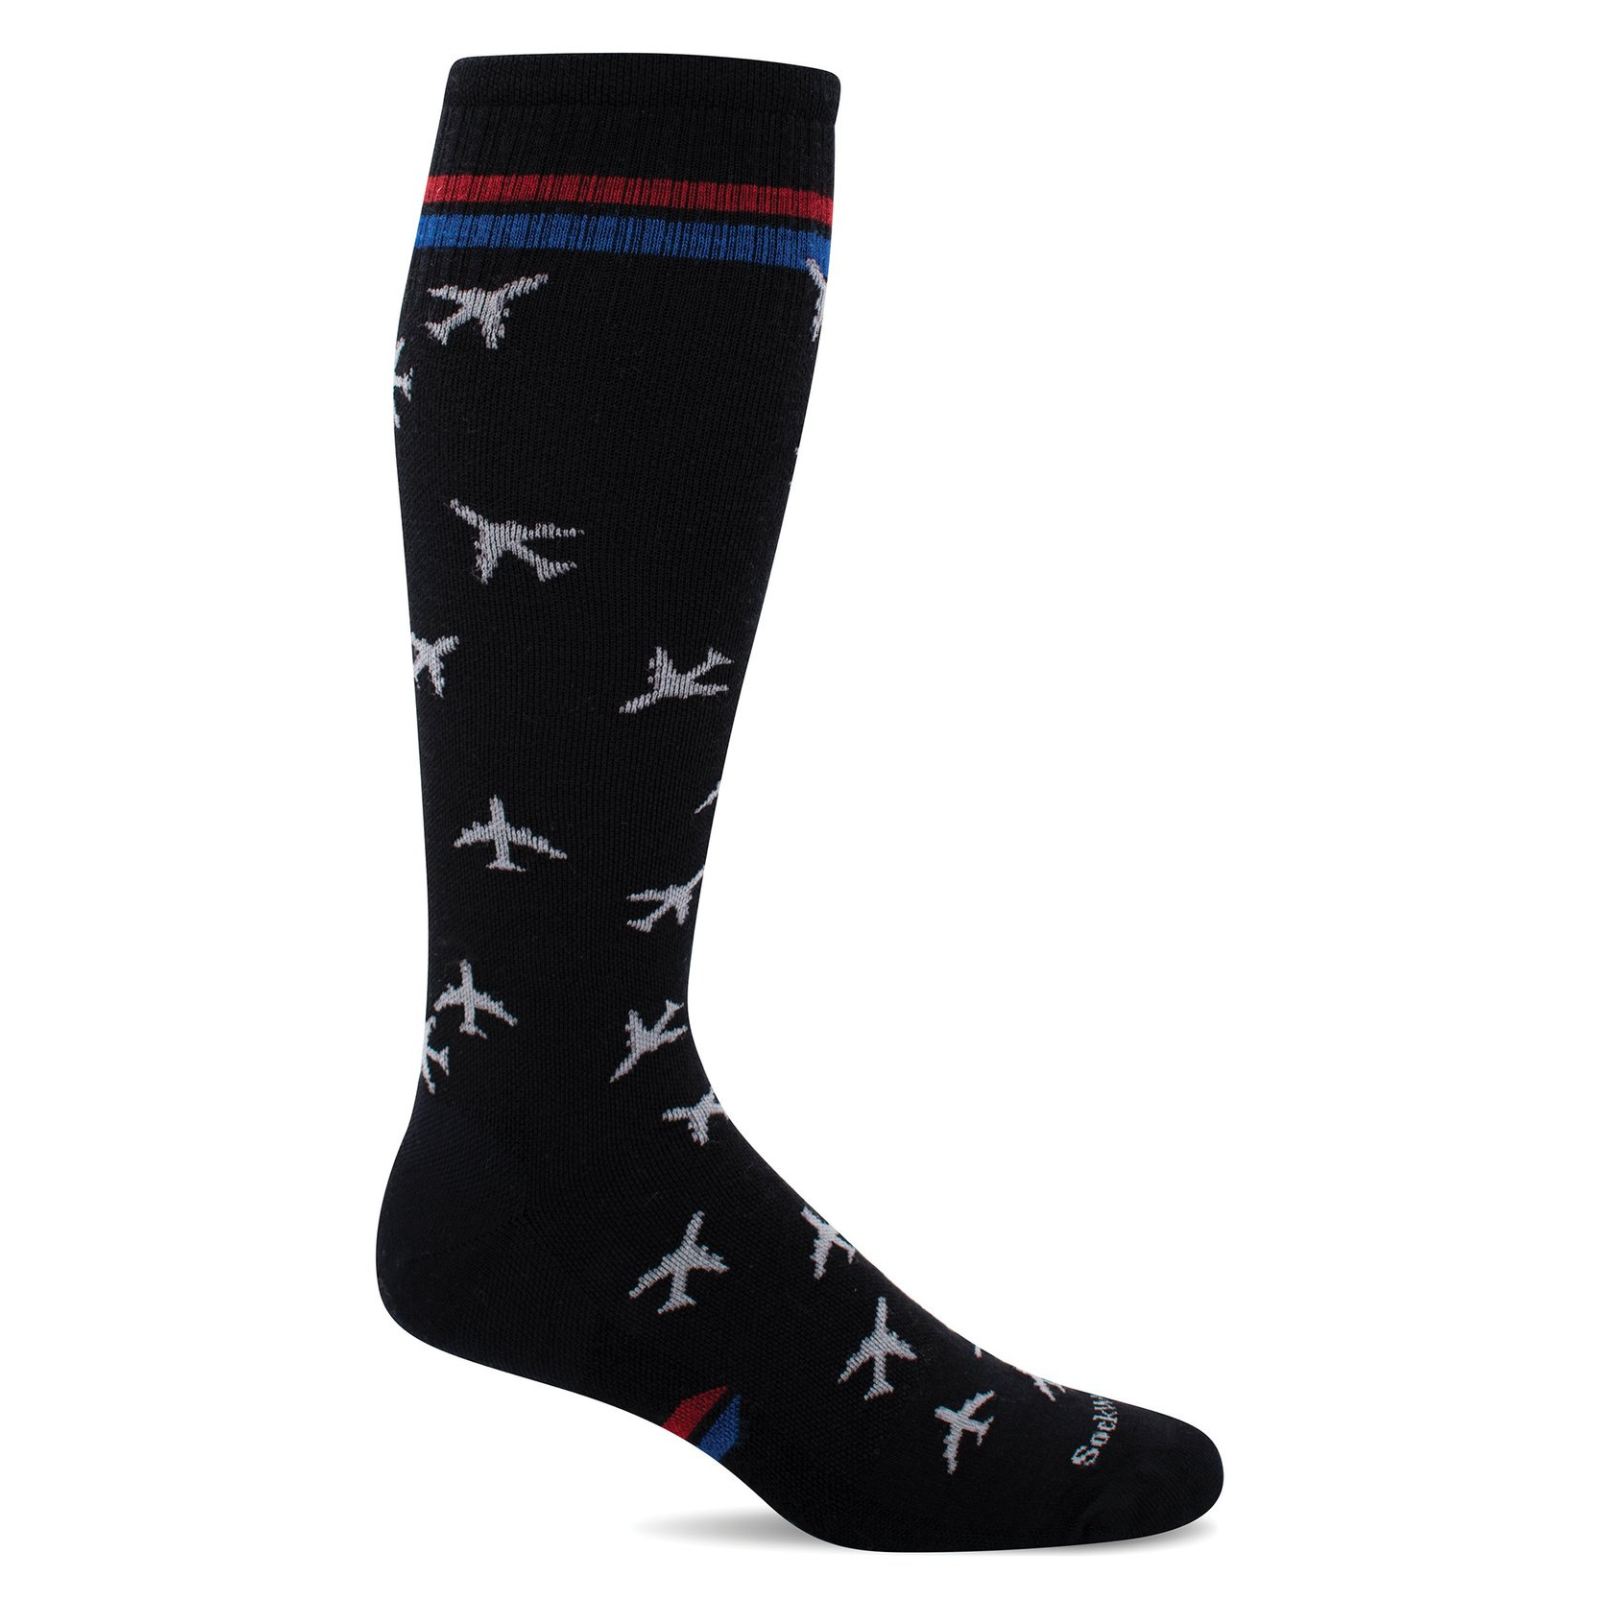 Sockwell In Flight moderate graduated compression (15-20 mmHg) men's black knee high socks featuring airplanes all over